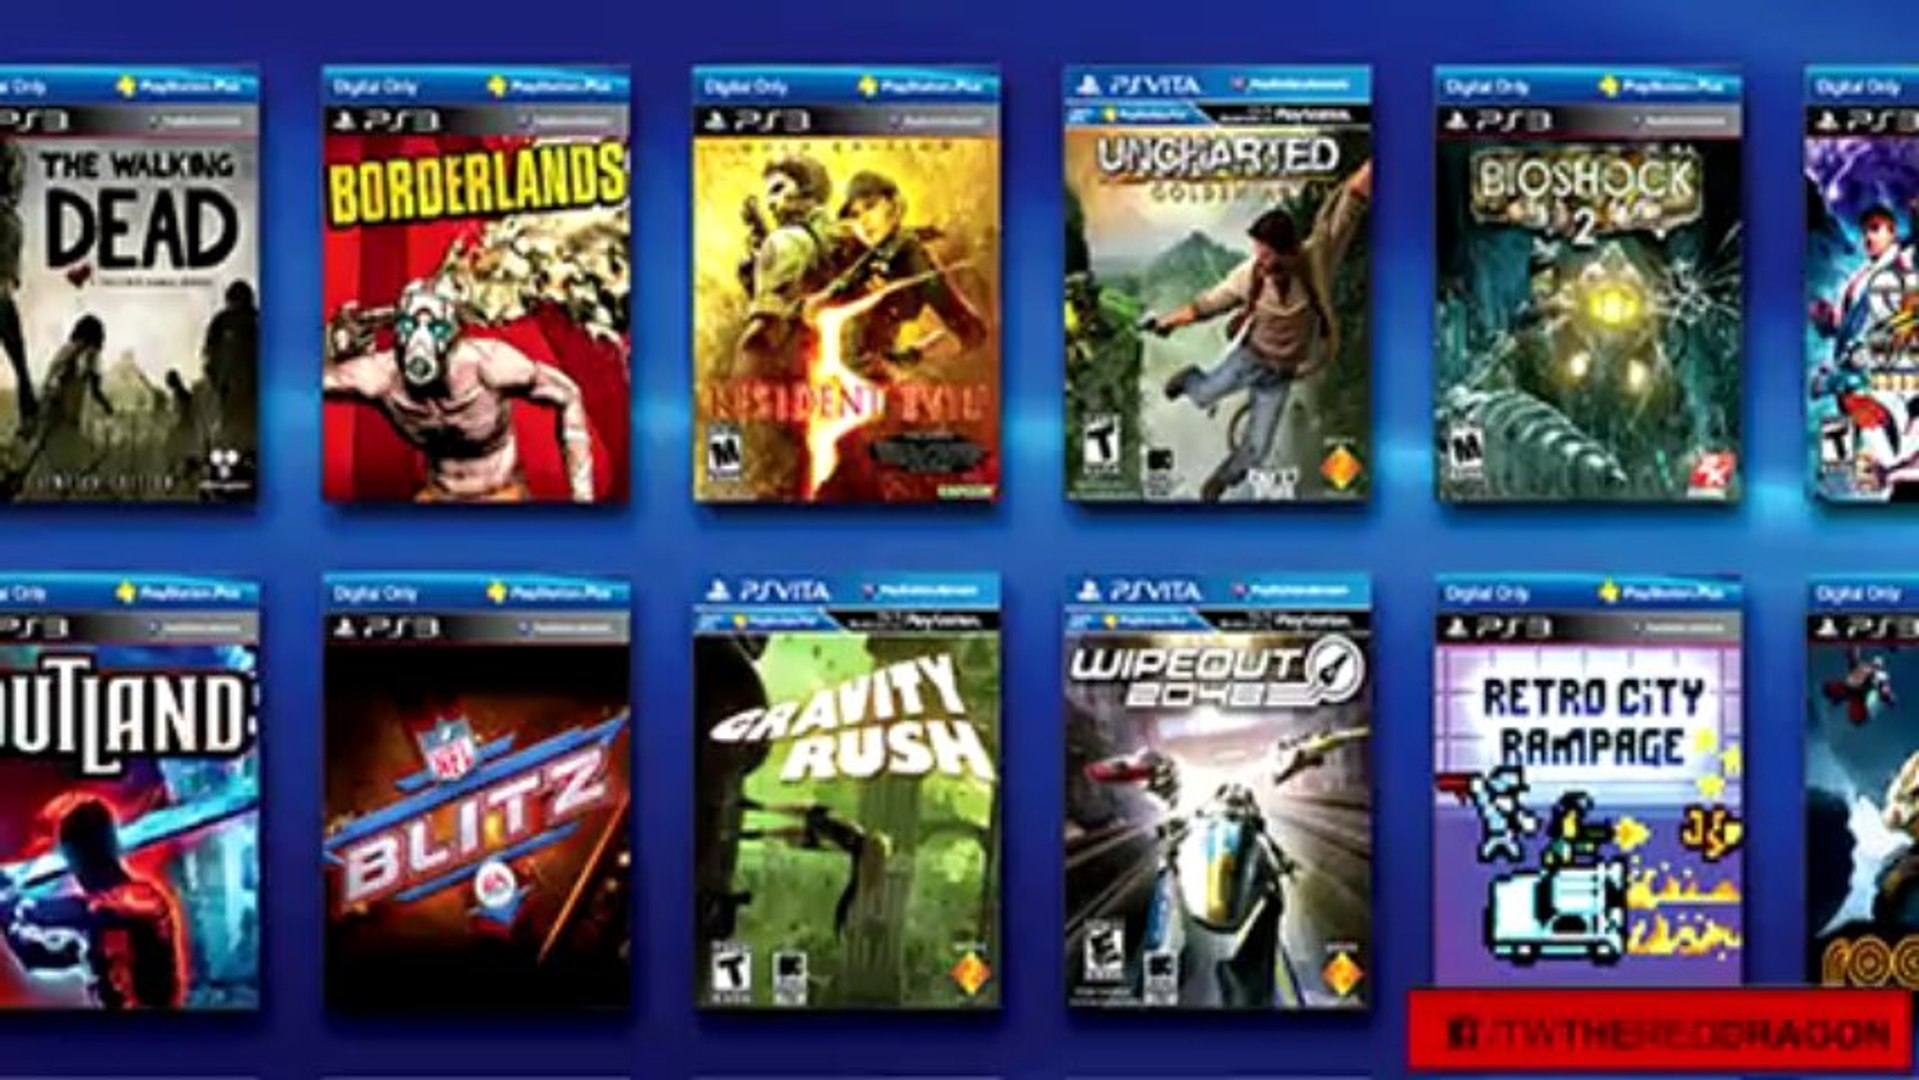 PlayStation Plus+ Free Games PS3/PS4/PSVITA  Games With Gold - Free Games  Xbox 360/Xbox One 